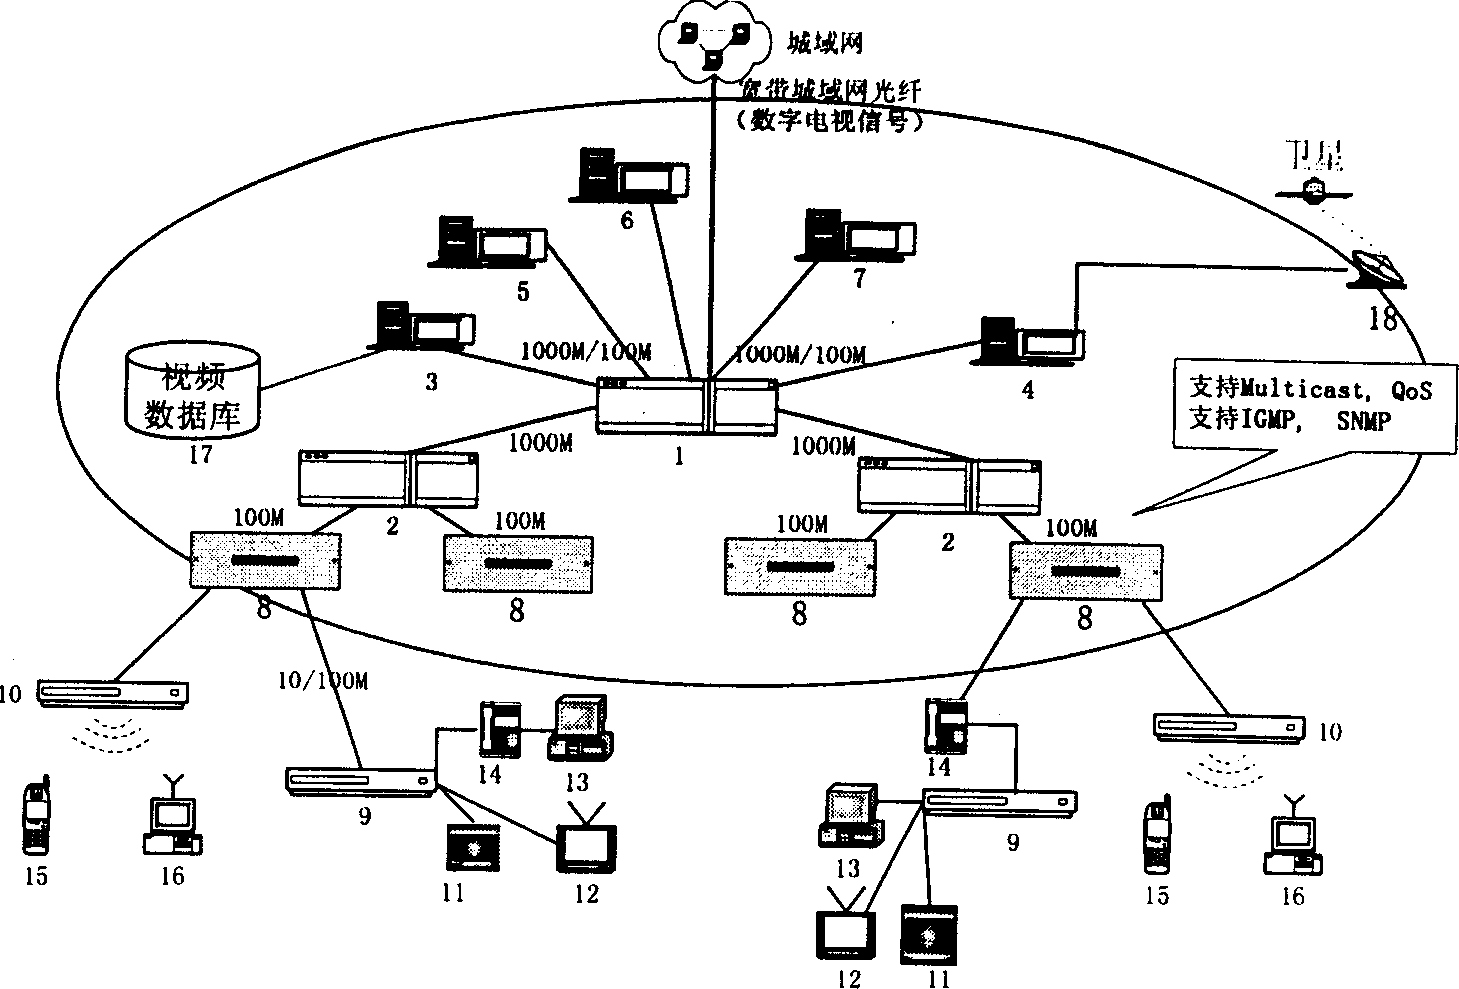 Community broad band Integrated service network system